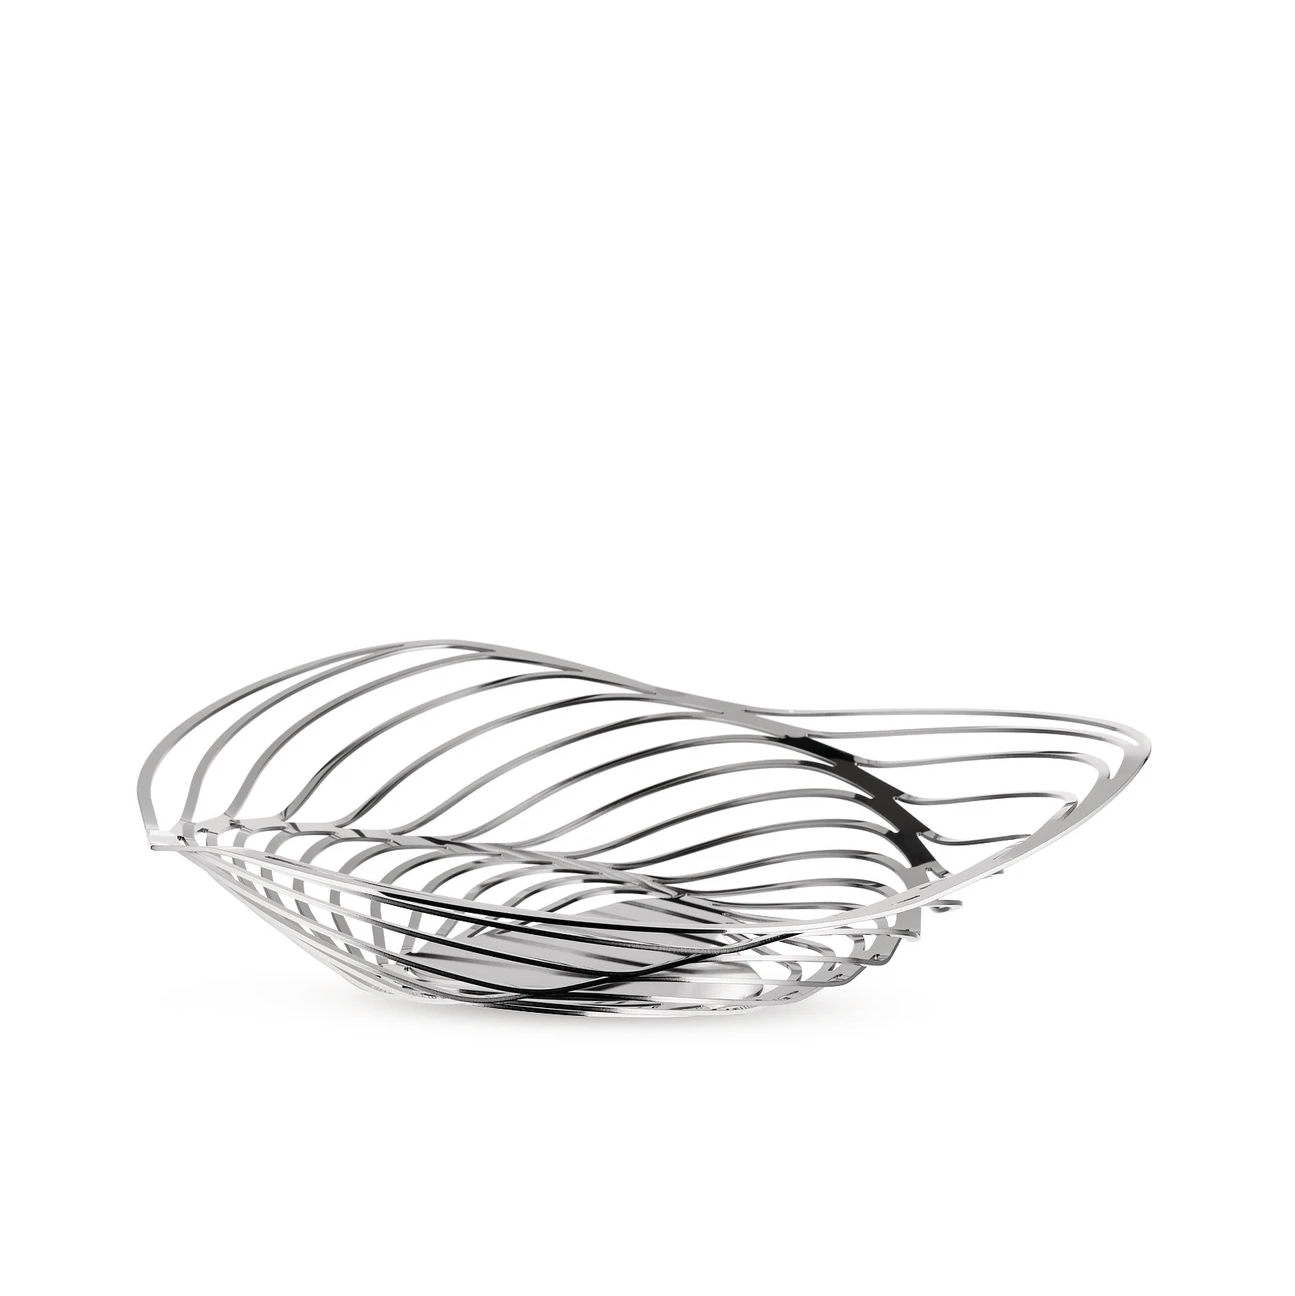 Alessi Trinity Fruit Basket - Centerpiece in Stainless Steel